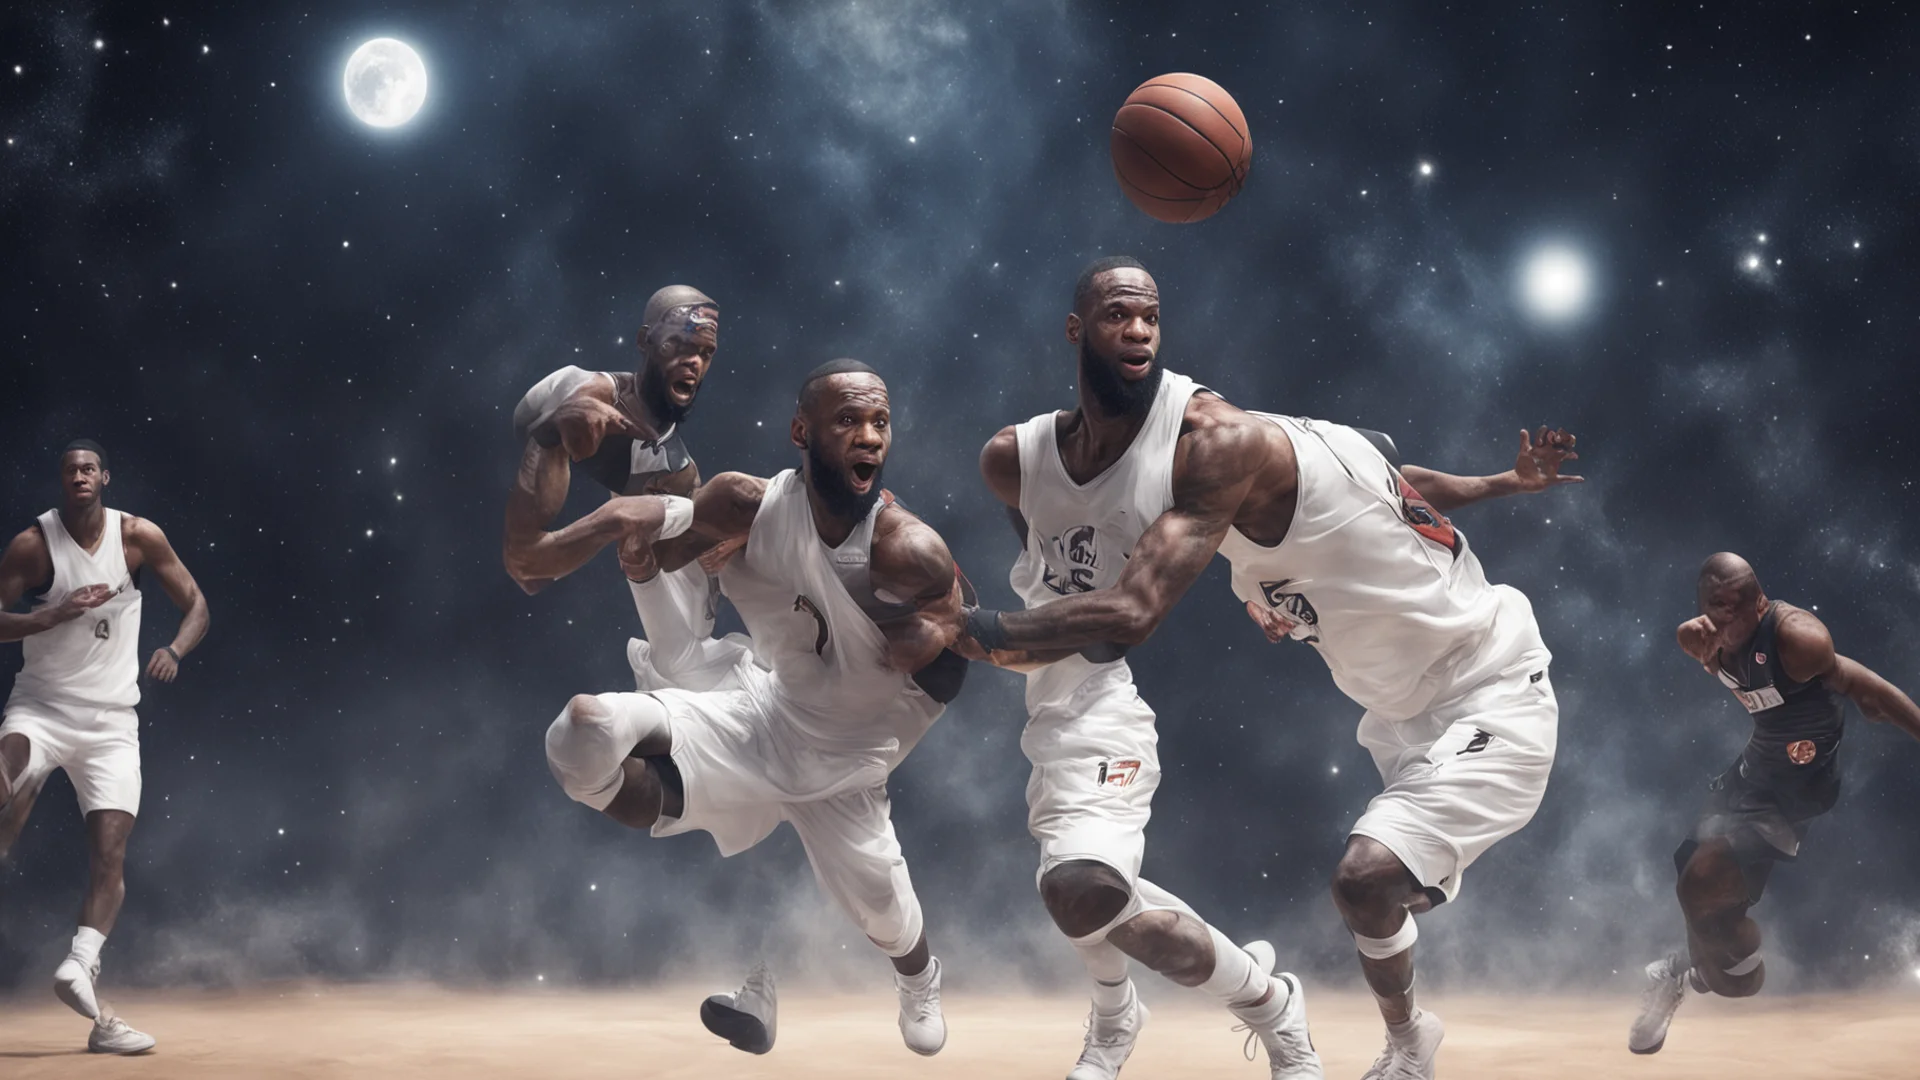 ailebron james into the space playing basketball with aliens  wide